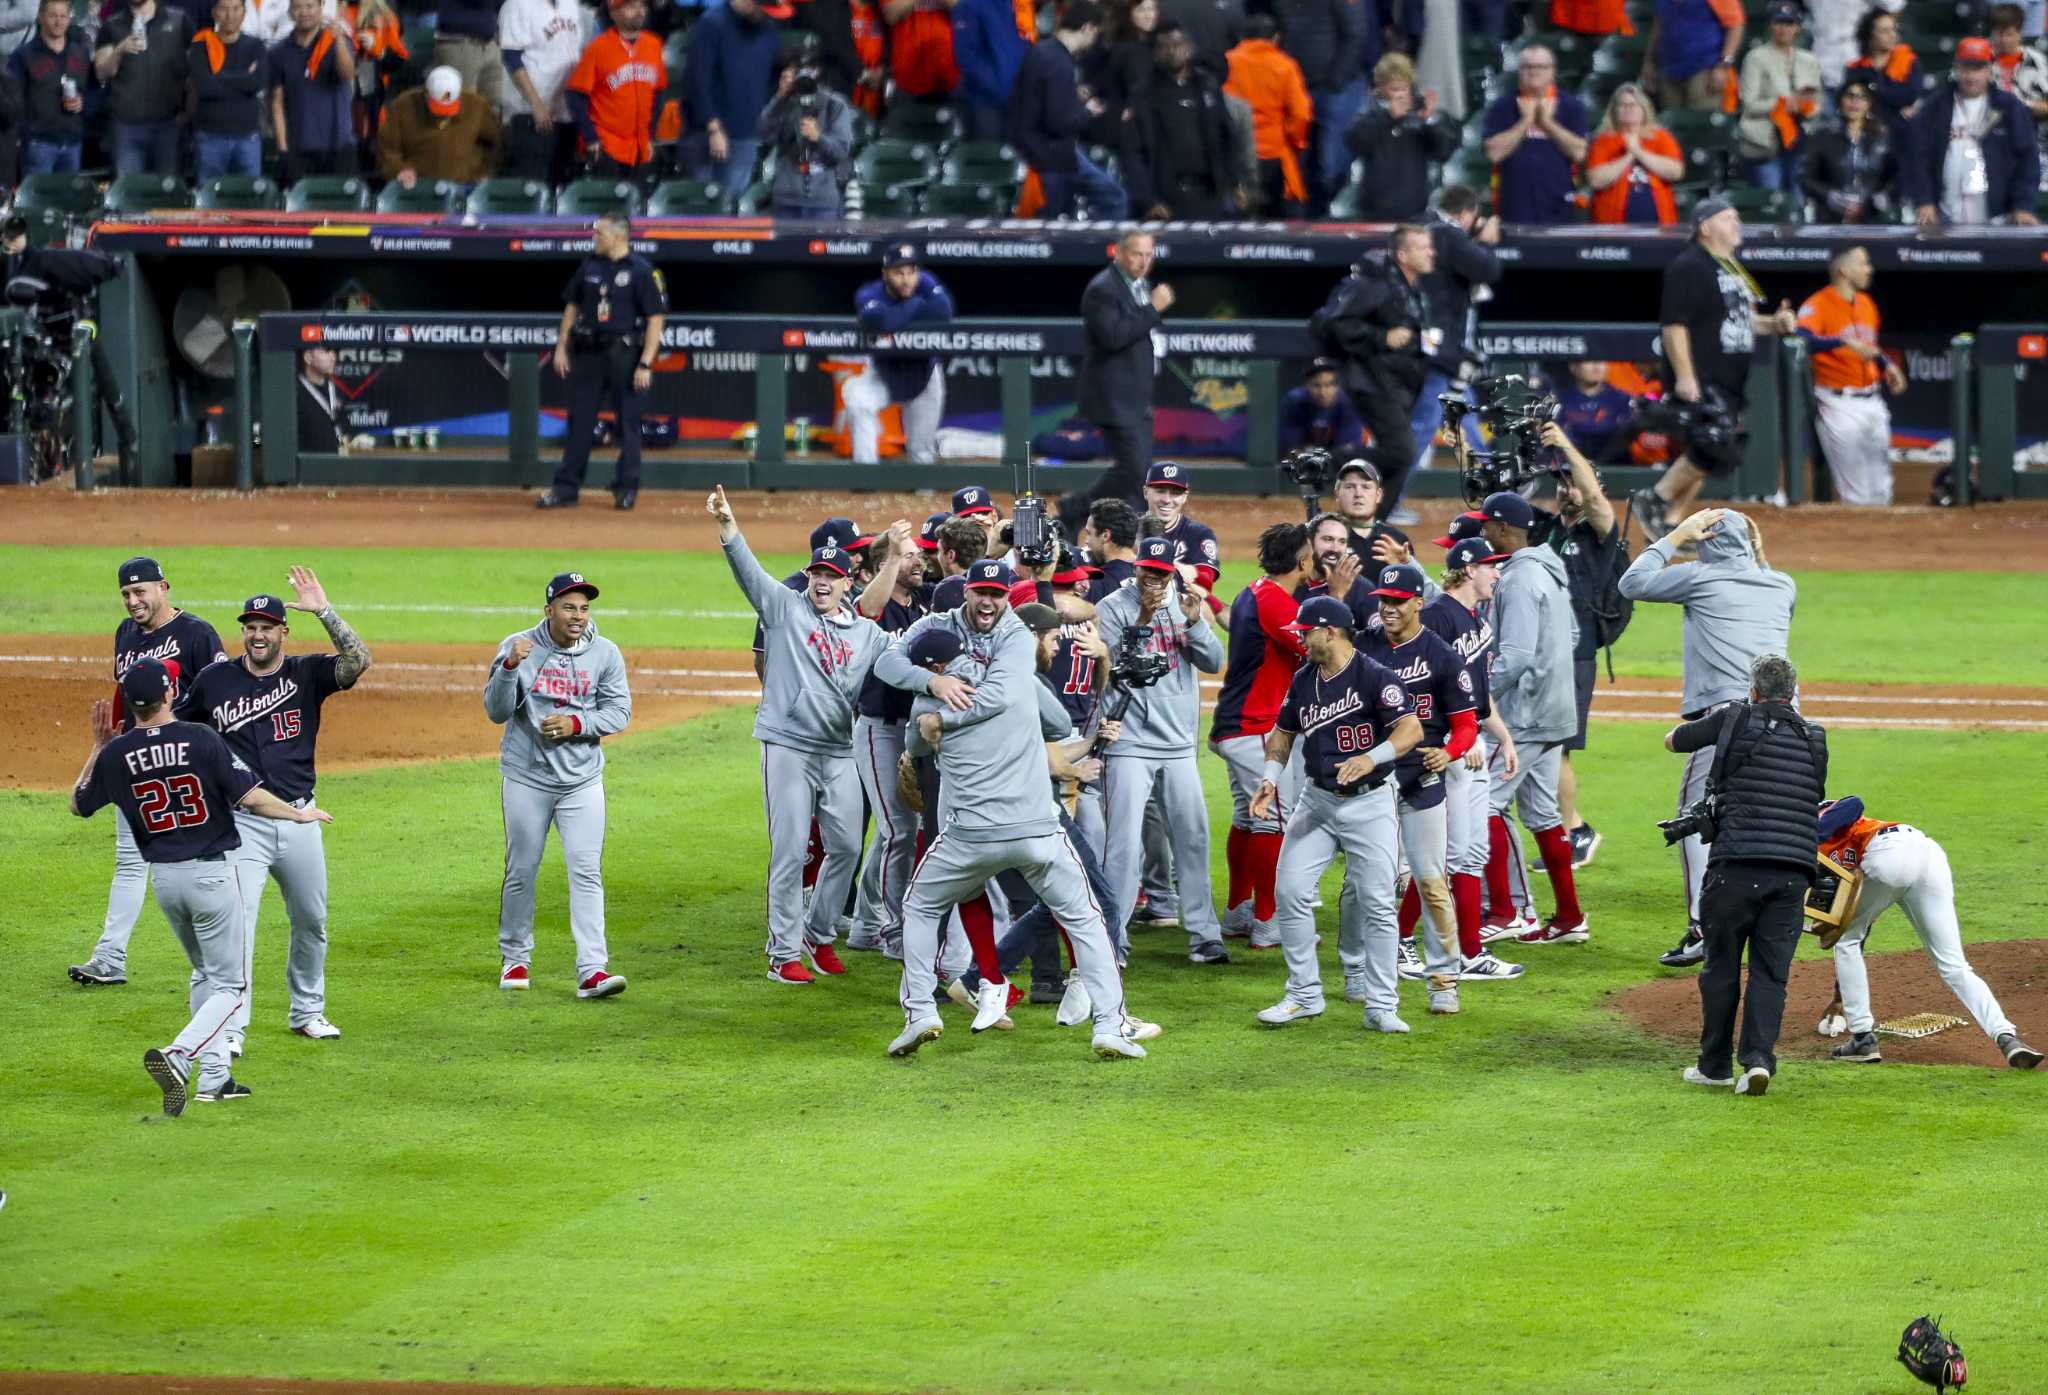 Washington Nationals to celebrate 2019 World Series Championship in place  of ceremonial first pitch